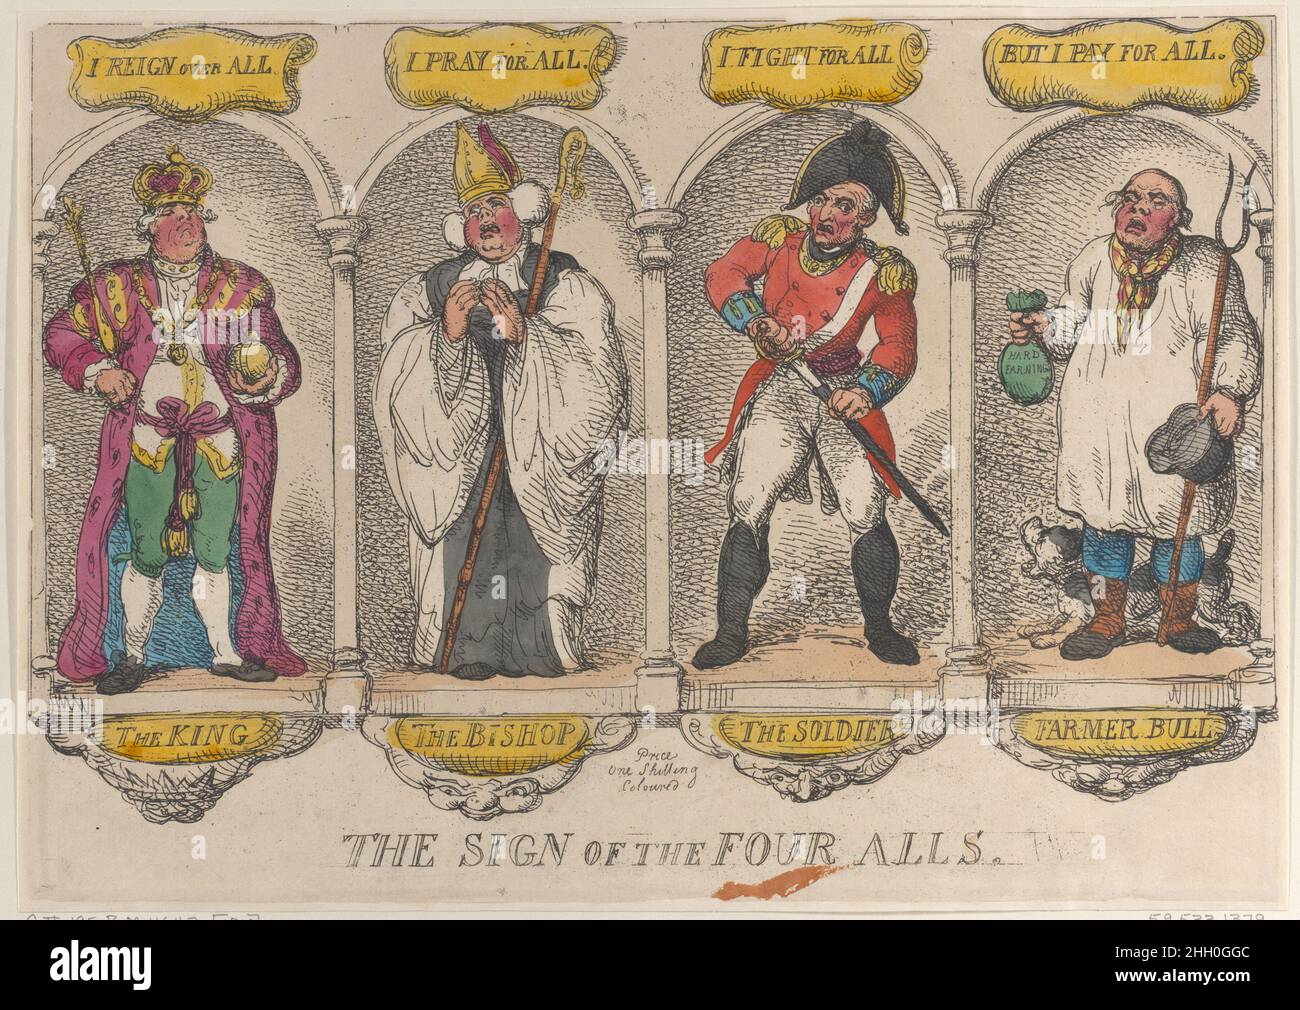 The Sign of the Four Alls 1810 Thomas Rowlandson Four figures, The King, The Bishop, The Soldier, and Farmer Bull, stand in niches divided by columns. Across the top, corresponding to each figure below, are the phrases, 'I Reign Over All,' 'I Pray For All,' 'I Fight For All,' and 'But I Pay For All.'. The Sign of the Four Alls. Thomas Rowlandson (British, London 1757–1827 London). 1810. Hand-colored etching. Thomas Tegg (British, 1776–1846) ?. Prints Stock Photo